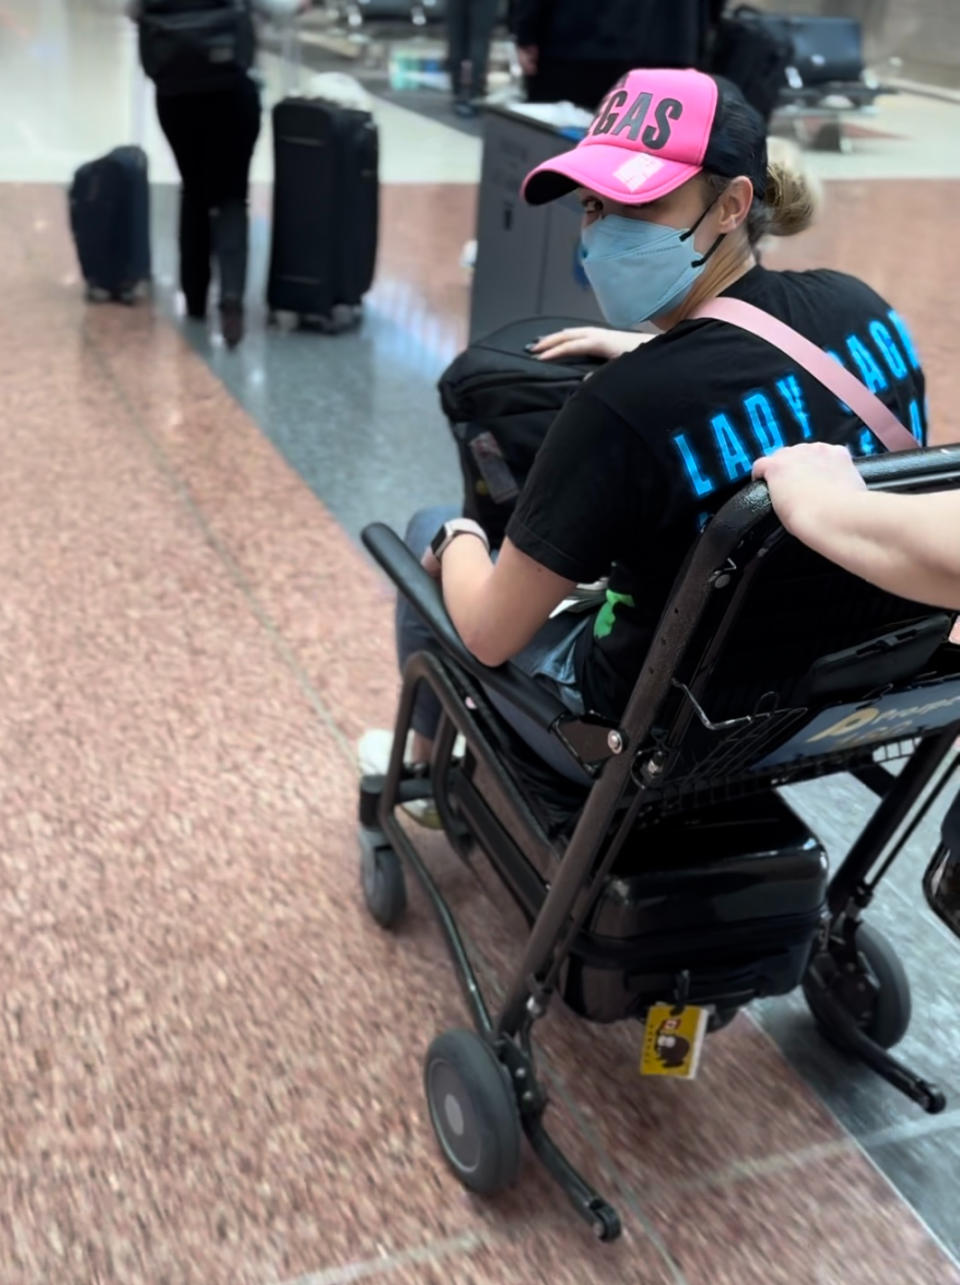 Doriana Homerski needed a wheelchair at an airport, after standing for a few minutes. Homerski wants people to know that long Covid is an invisible illness and though it may not look disabling, it is. (Image provided by Doriana Homerski)